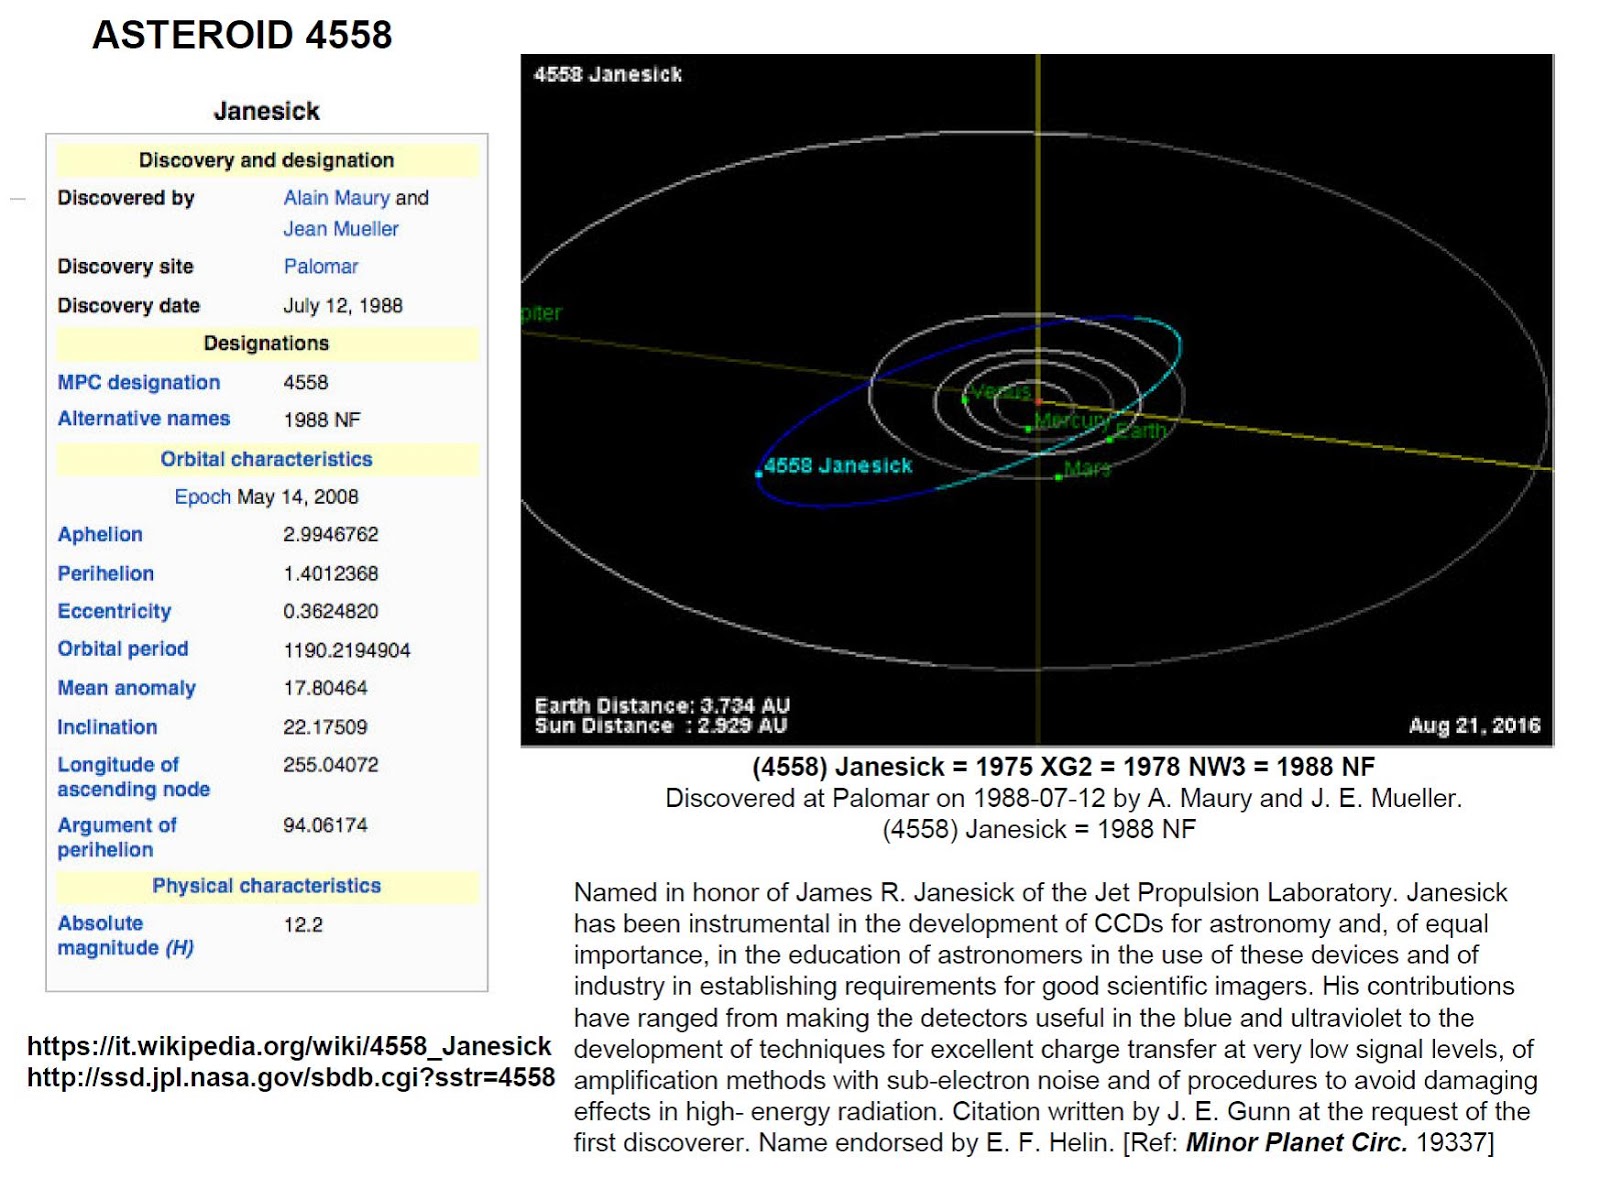 Asteroid 4558 Janesick named in honor of James Janesick